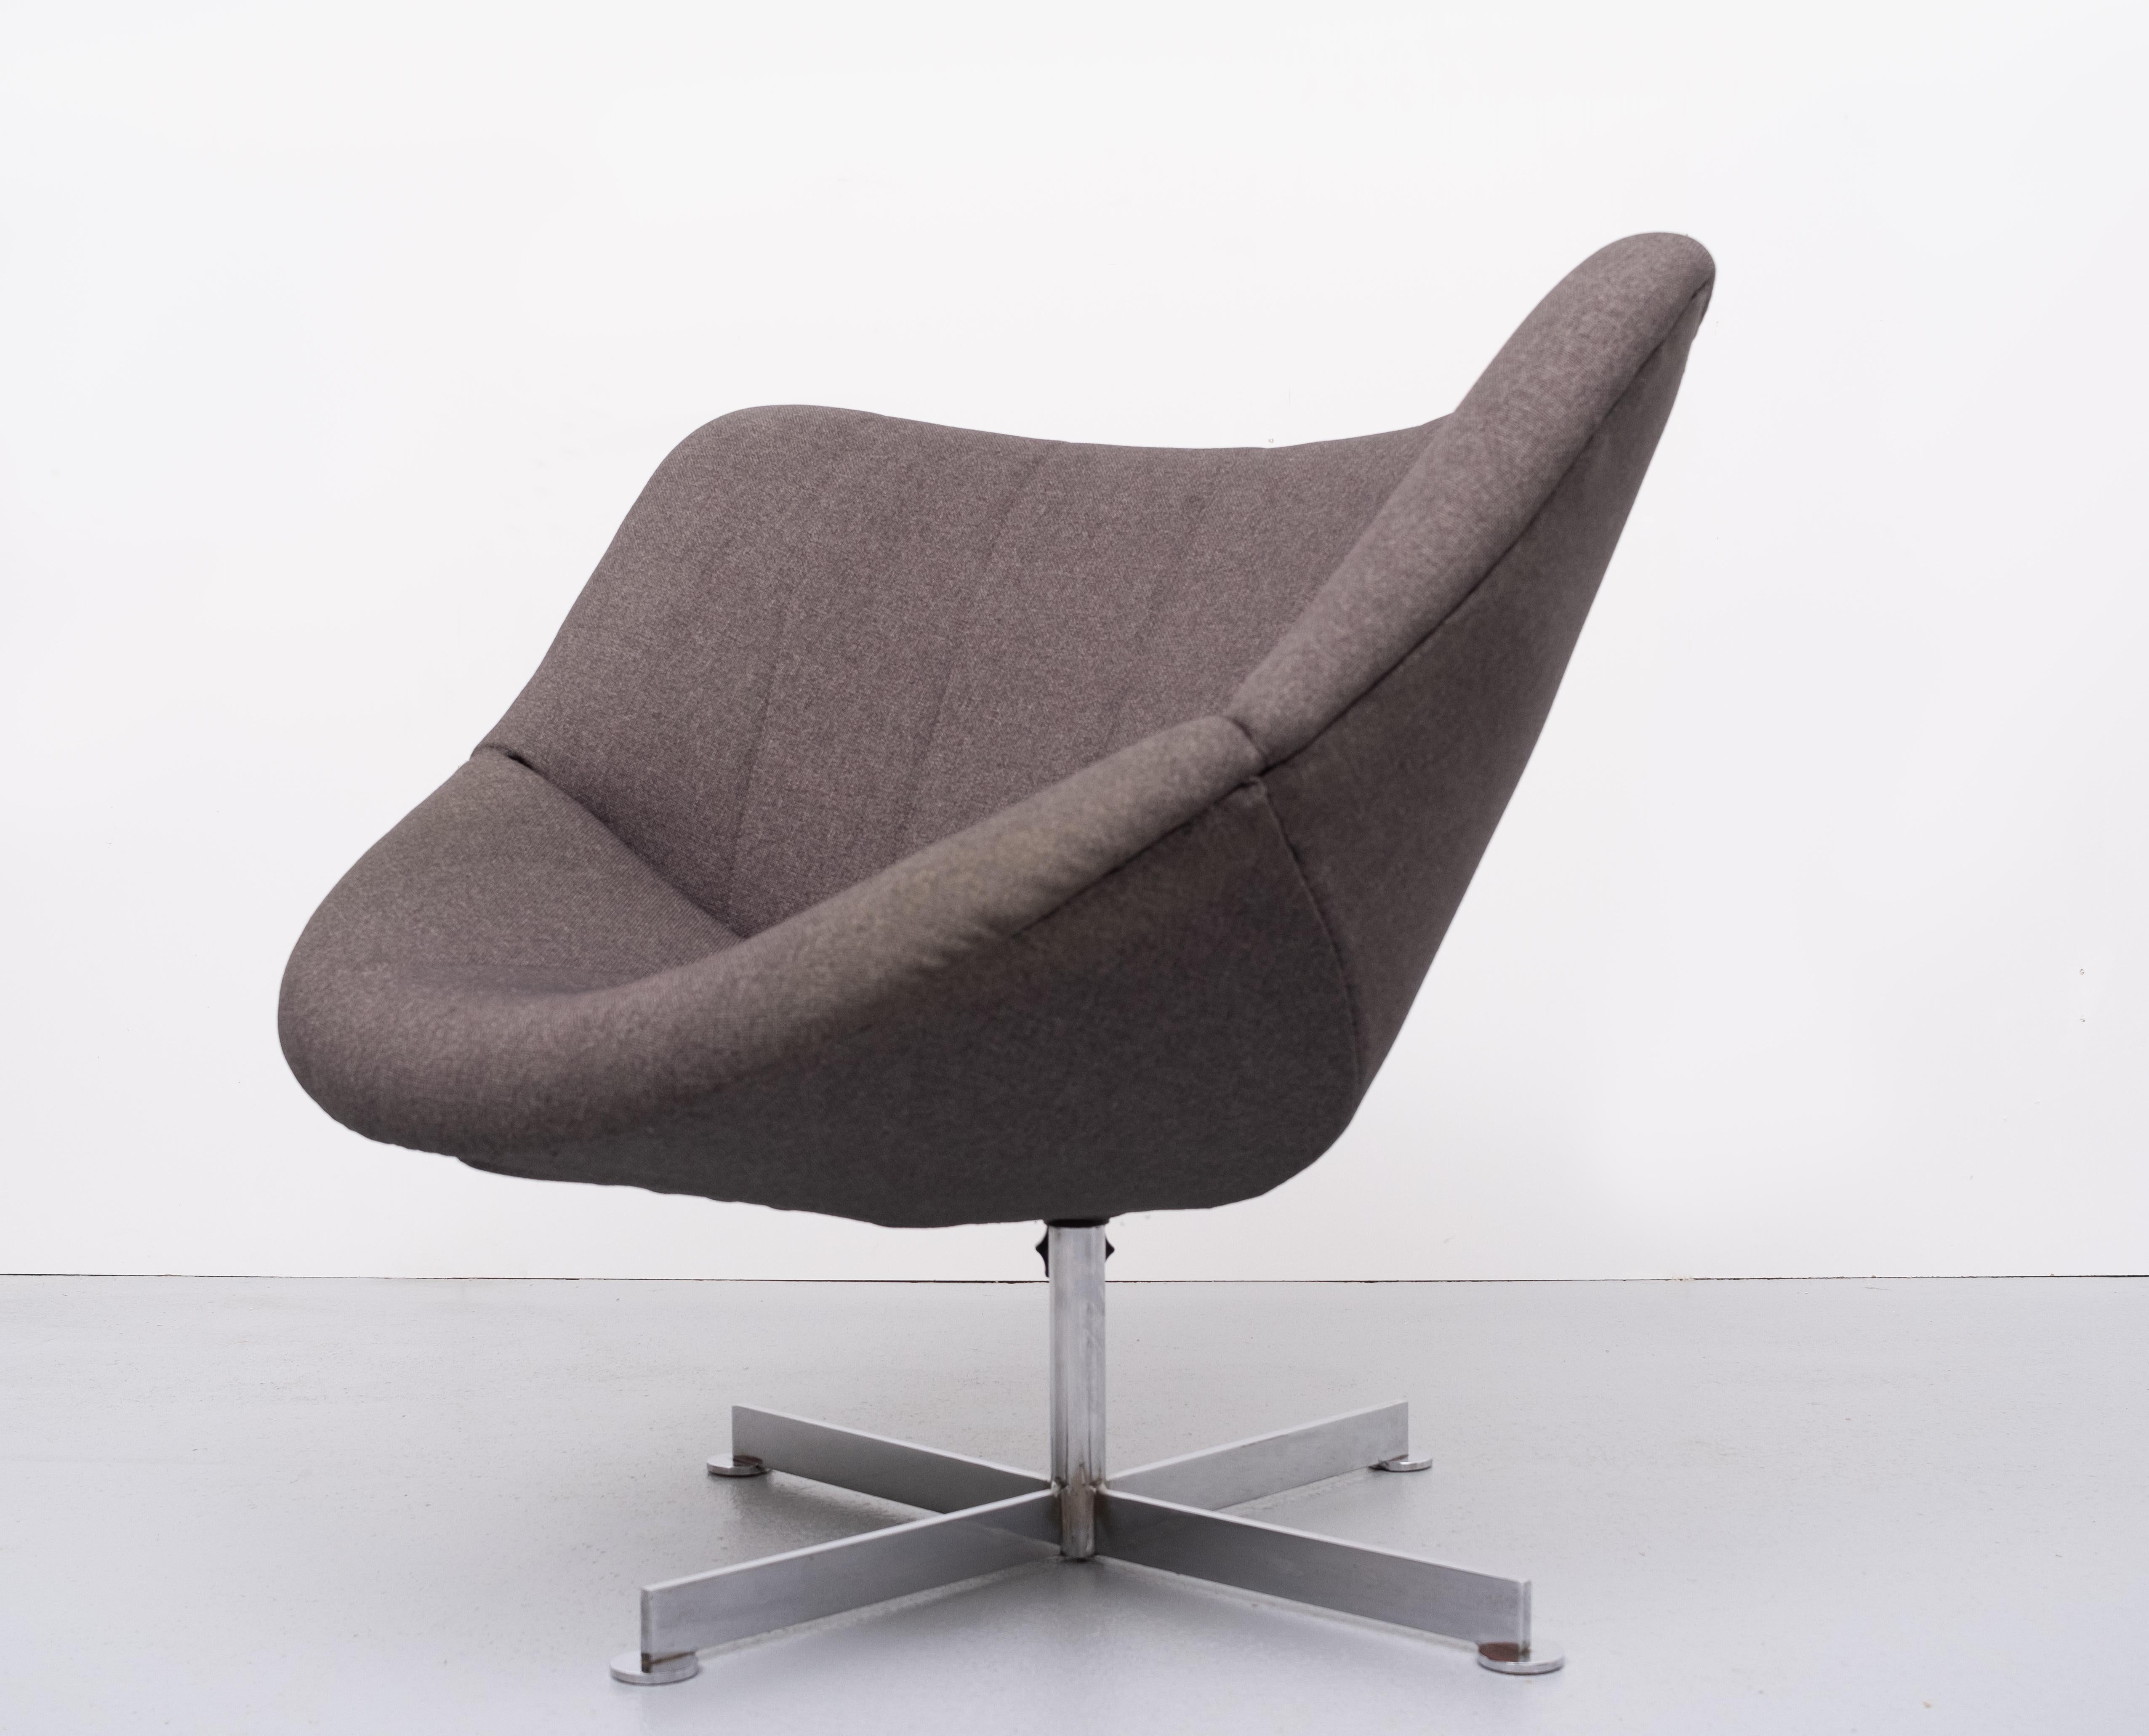 Wool Lip Chair by Rudolf Wolf for Rohe Noordwolde from the 1960s